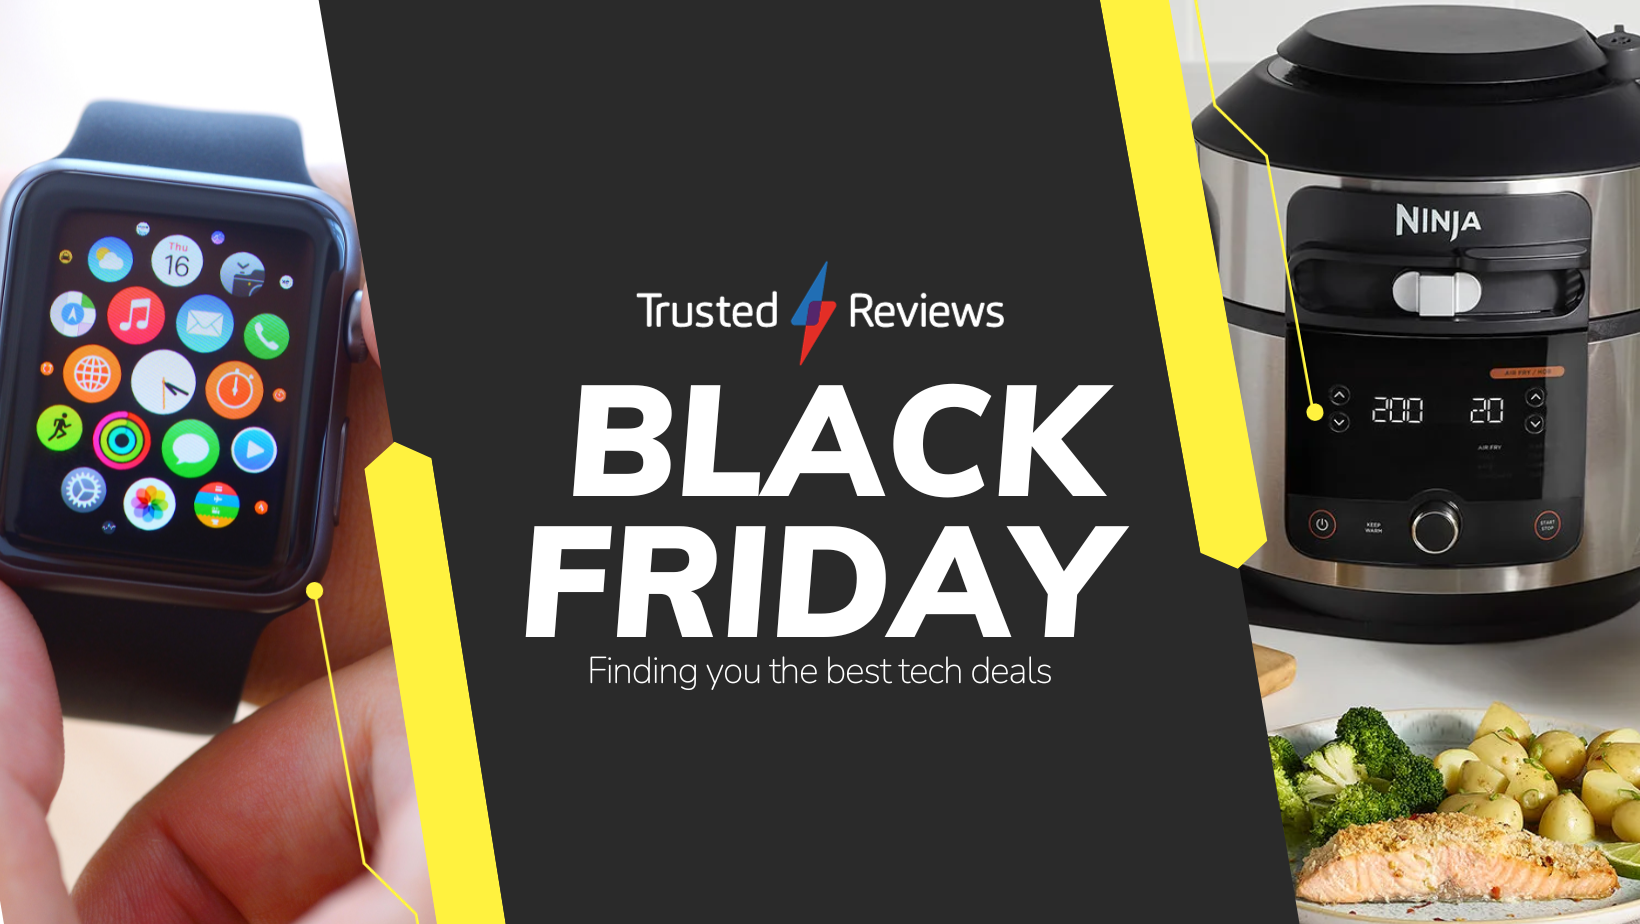 Black Friday and Cyber Monday Deals Live: The latest bargains on offer